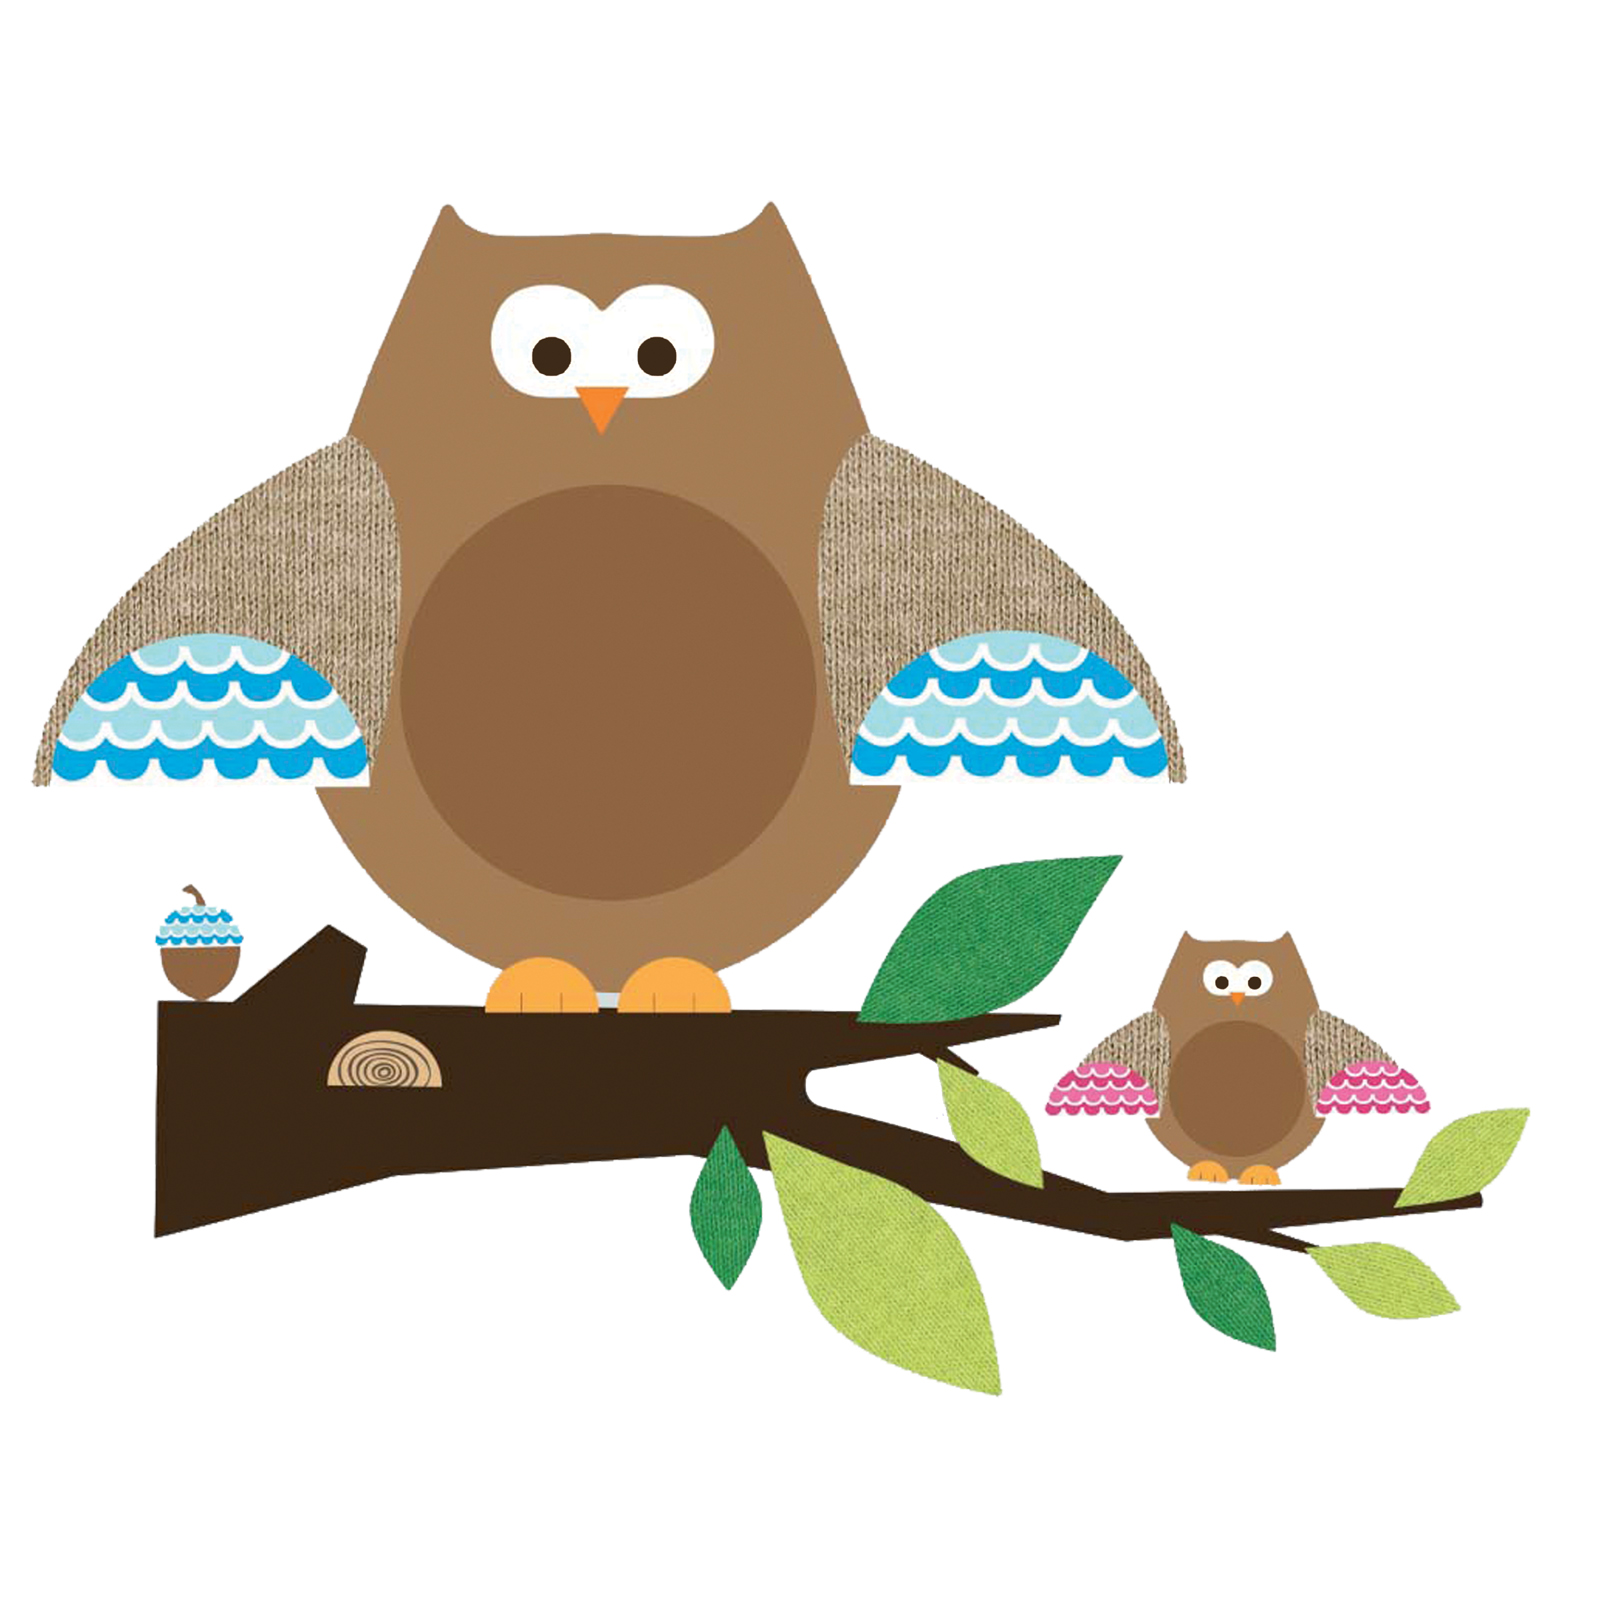 RoomMates One Decor Owl & Branch Peel & Stick Wall Decals